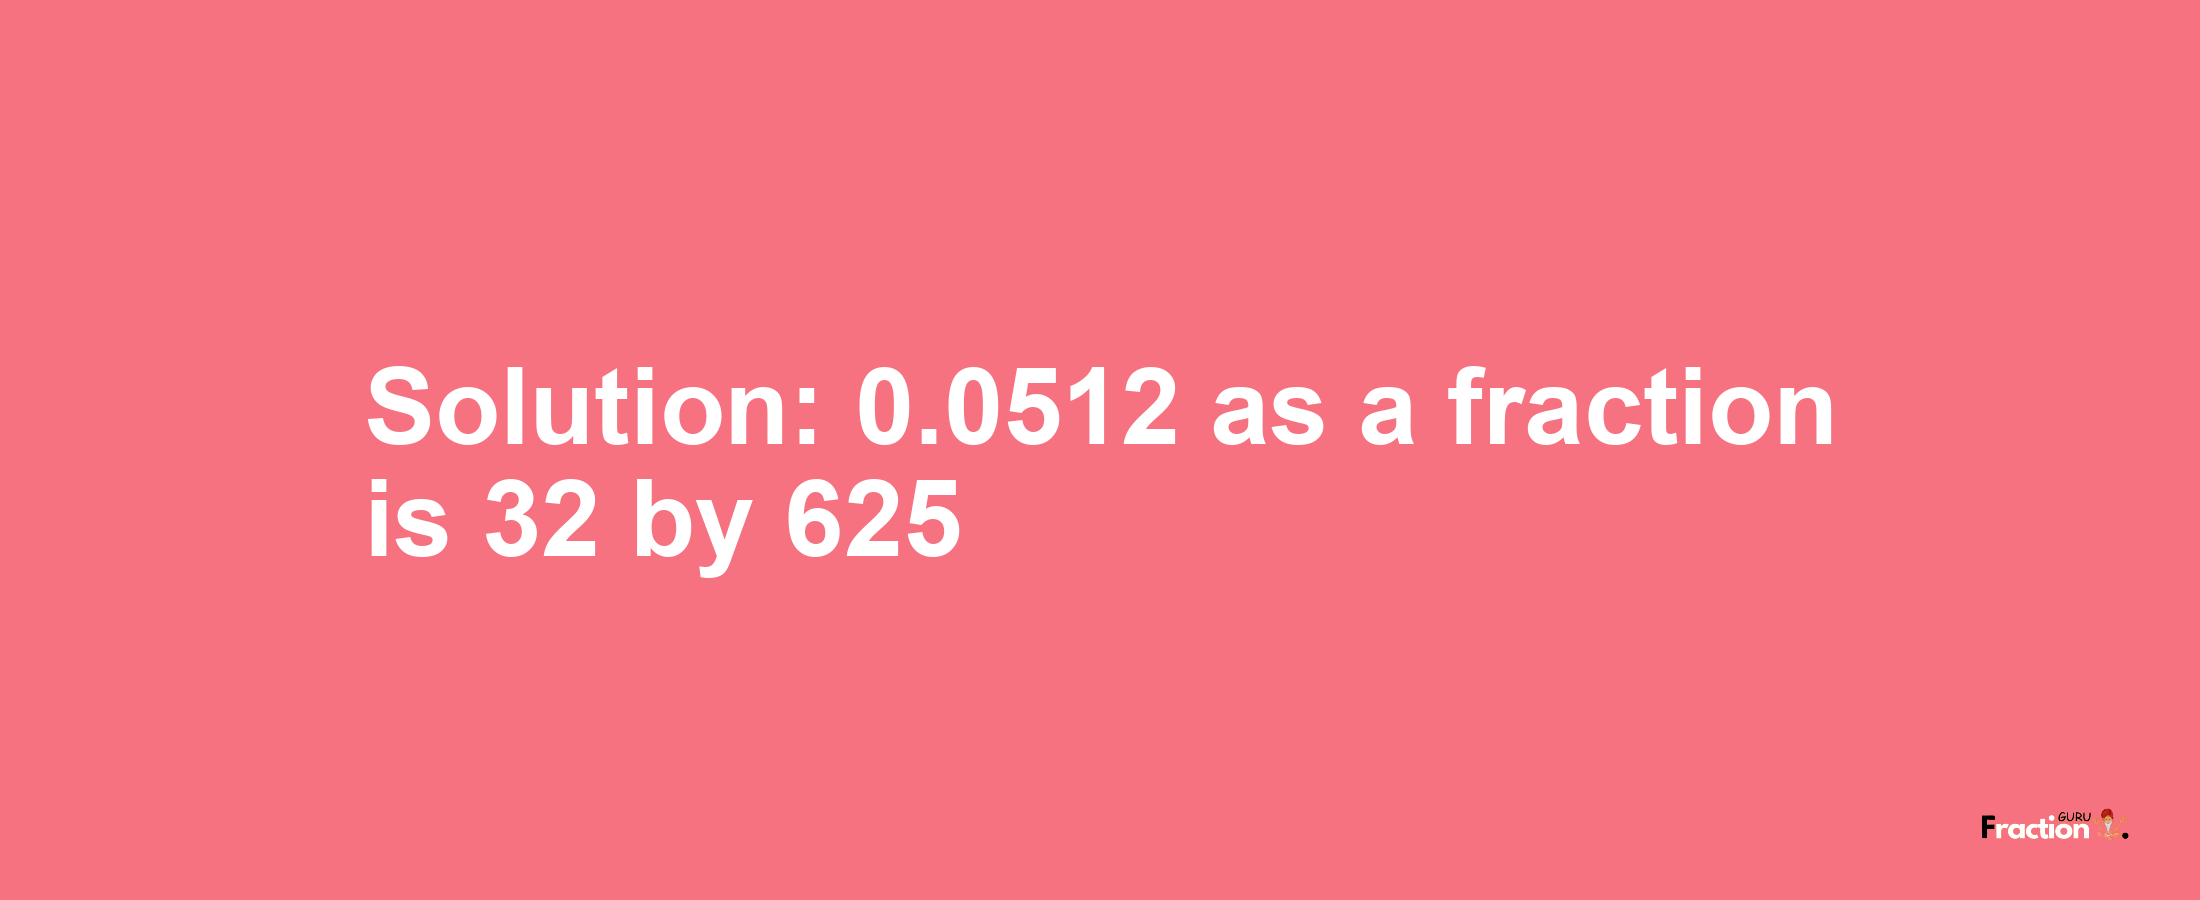 Solution:0.0512 as a fraction is 32/625